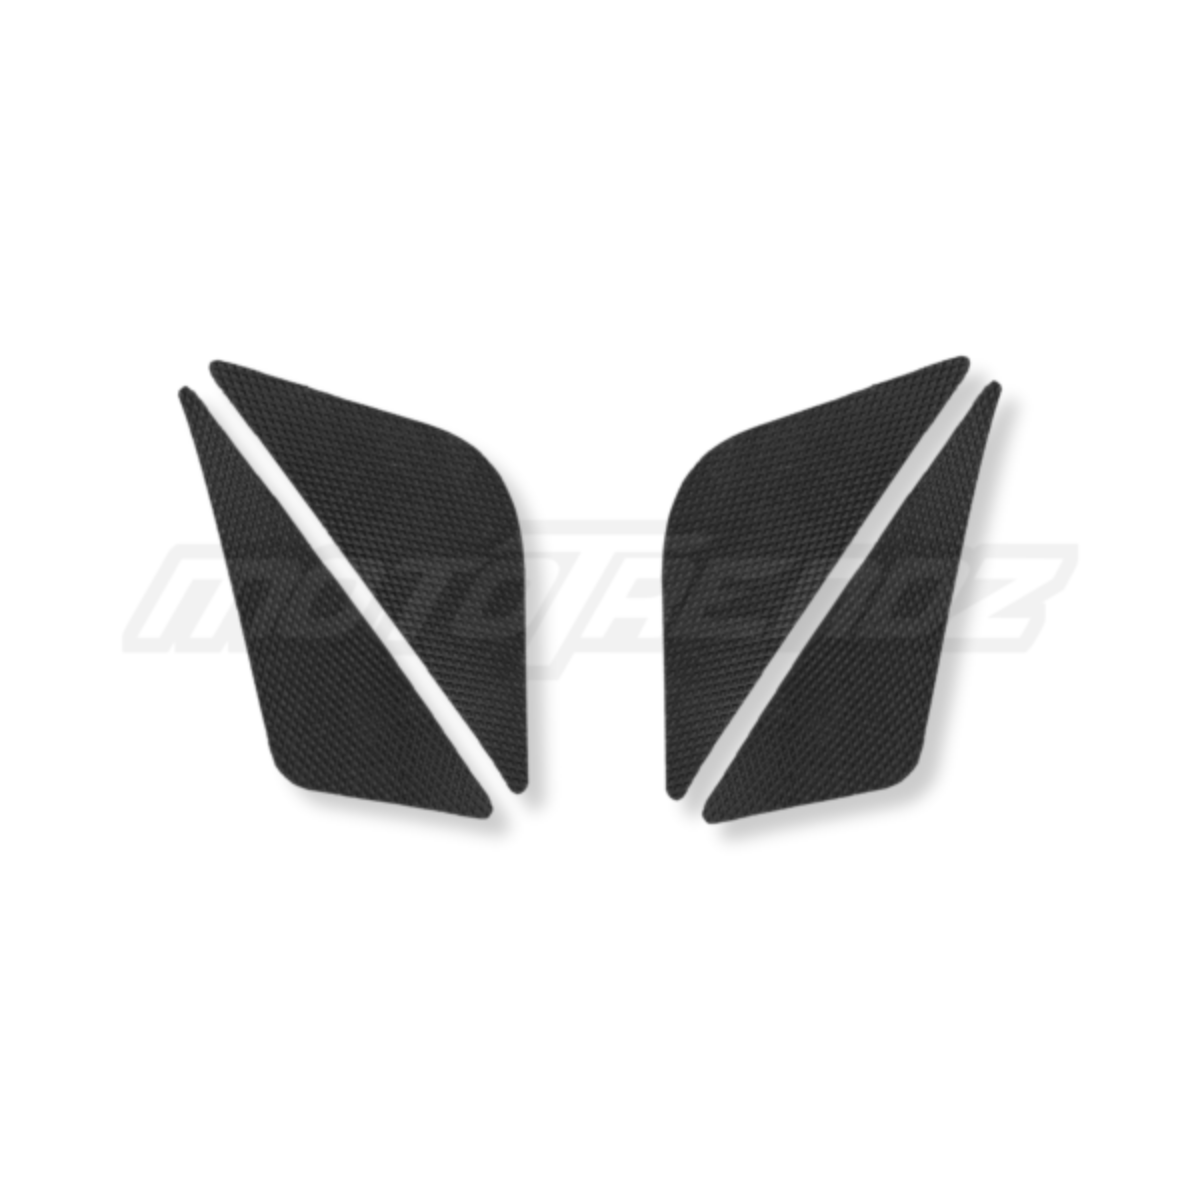 Traction Pads for KTM RC (Old Model) 125/200/390 3